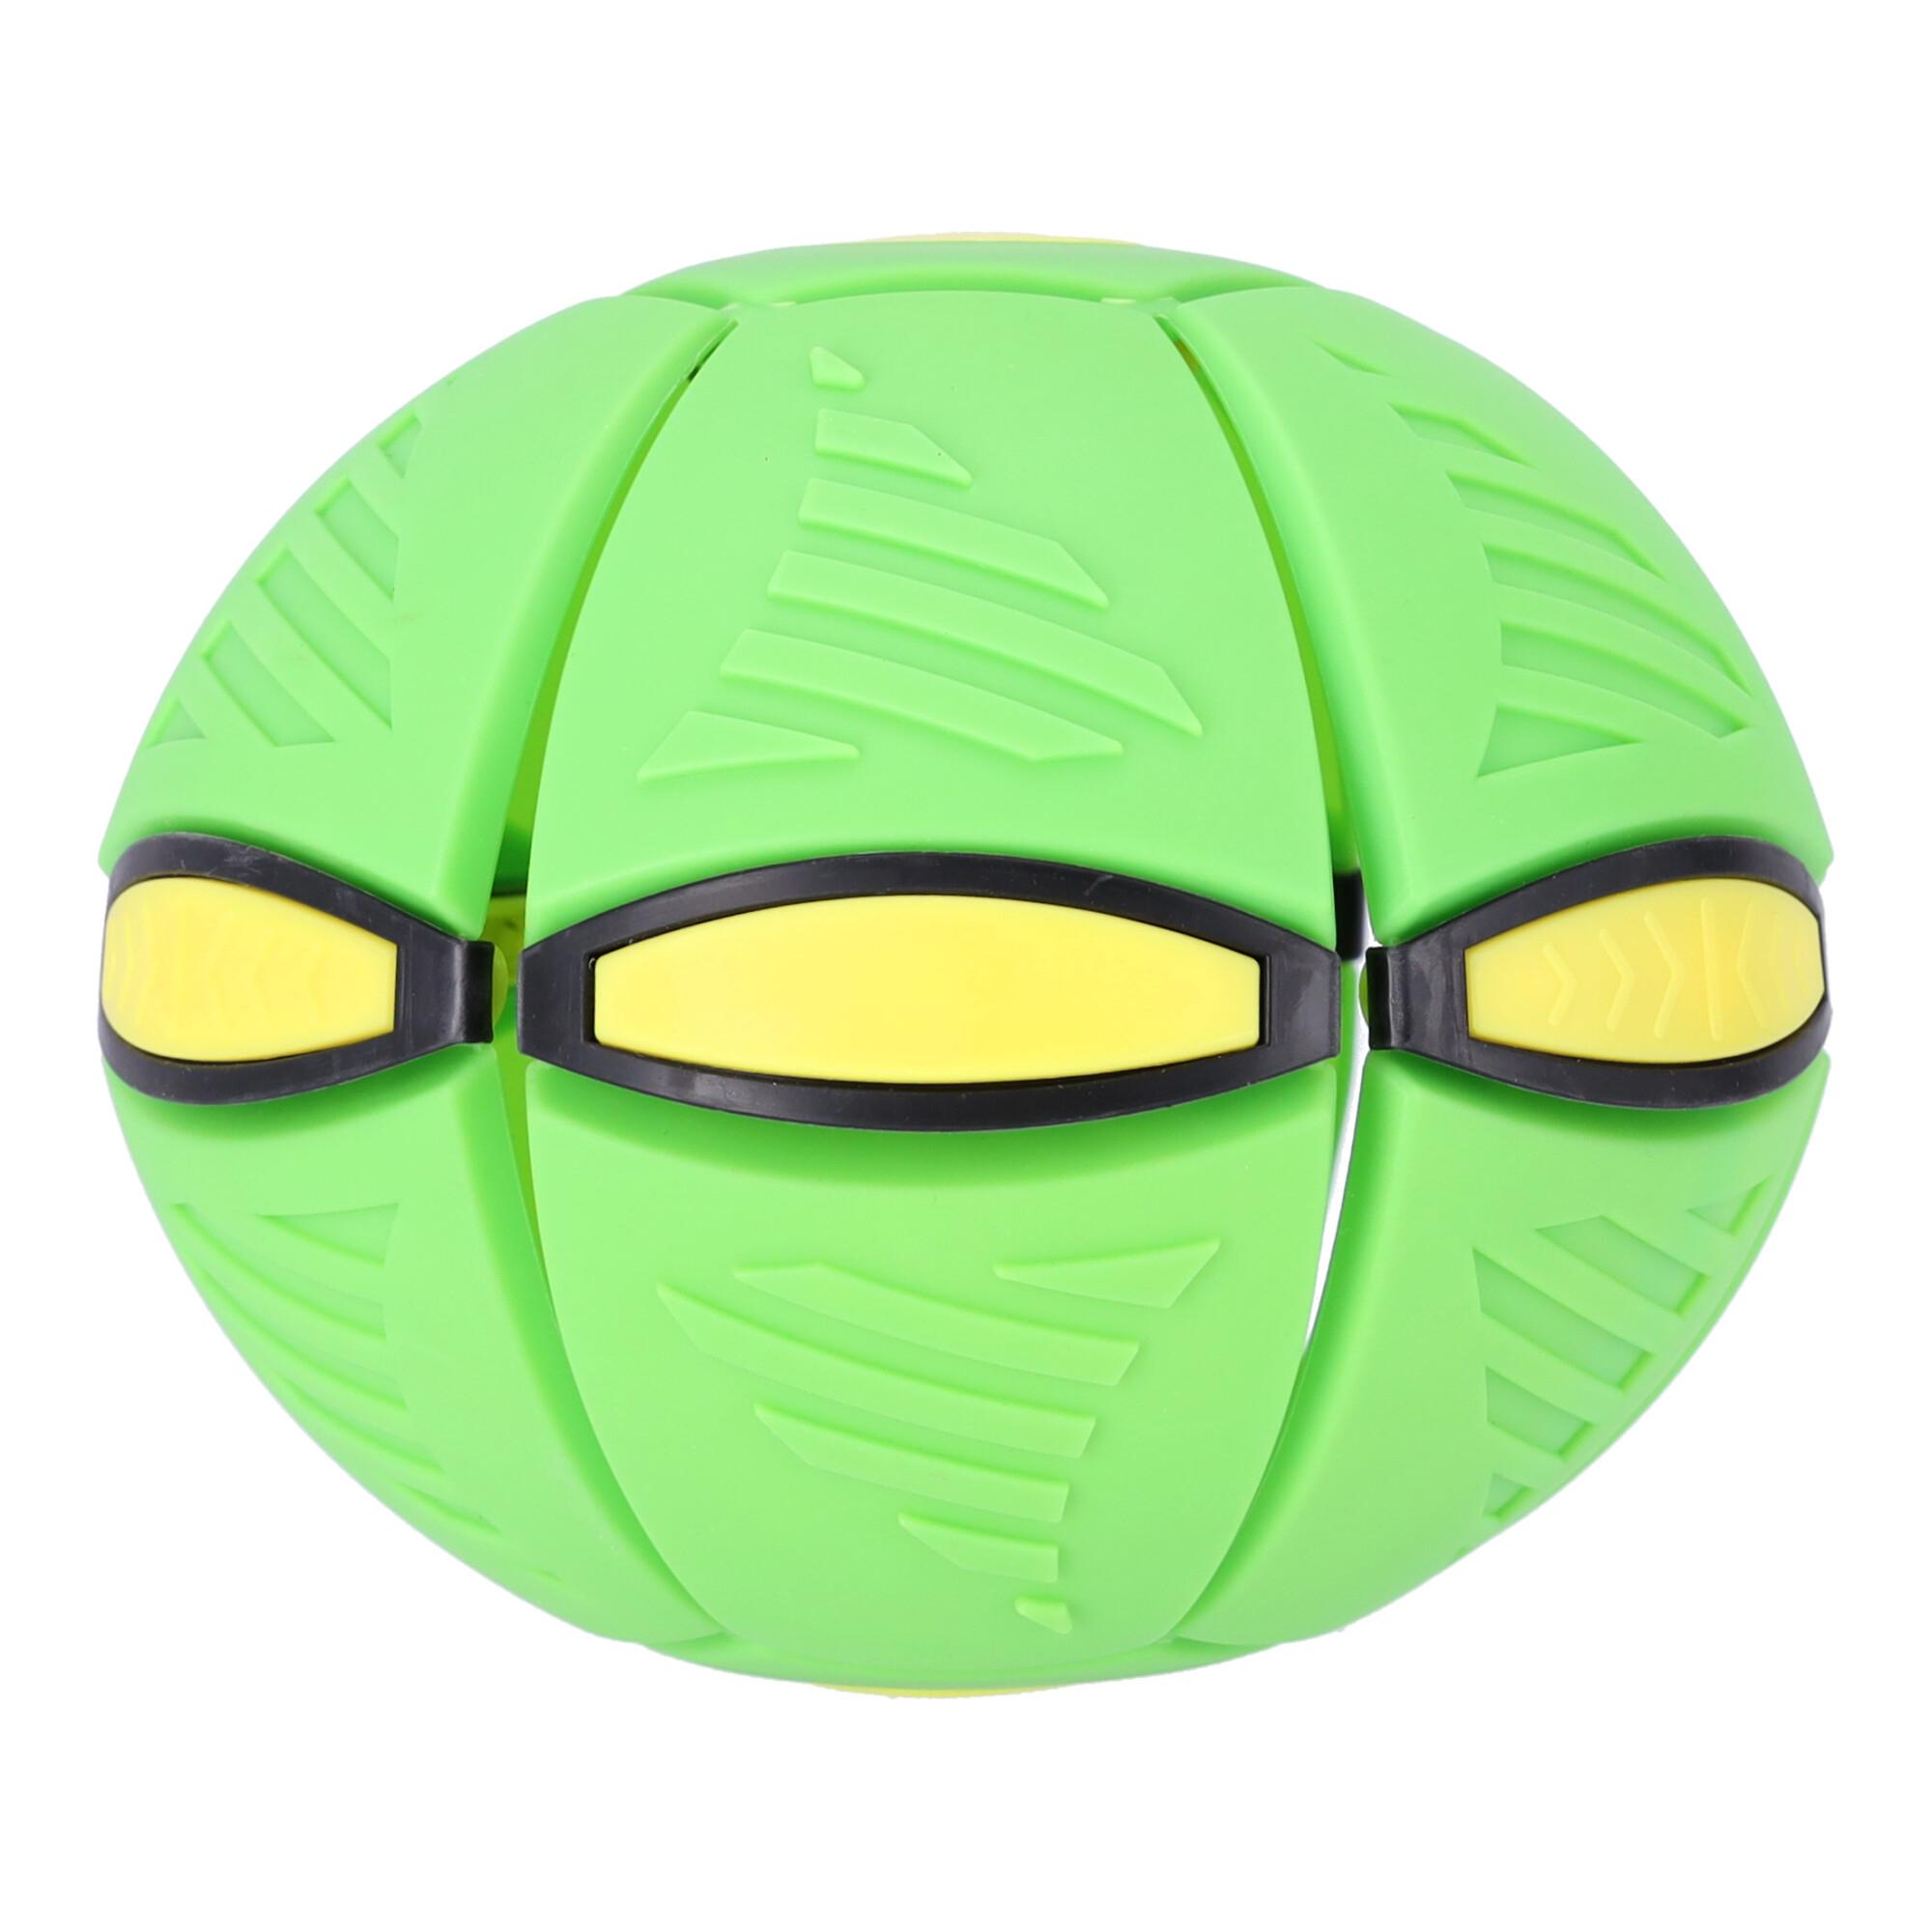 Flying ball 2-in-1, disc-ball - green